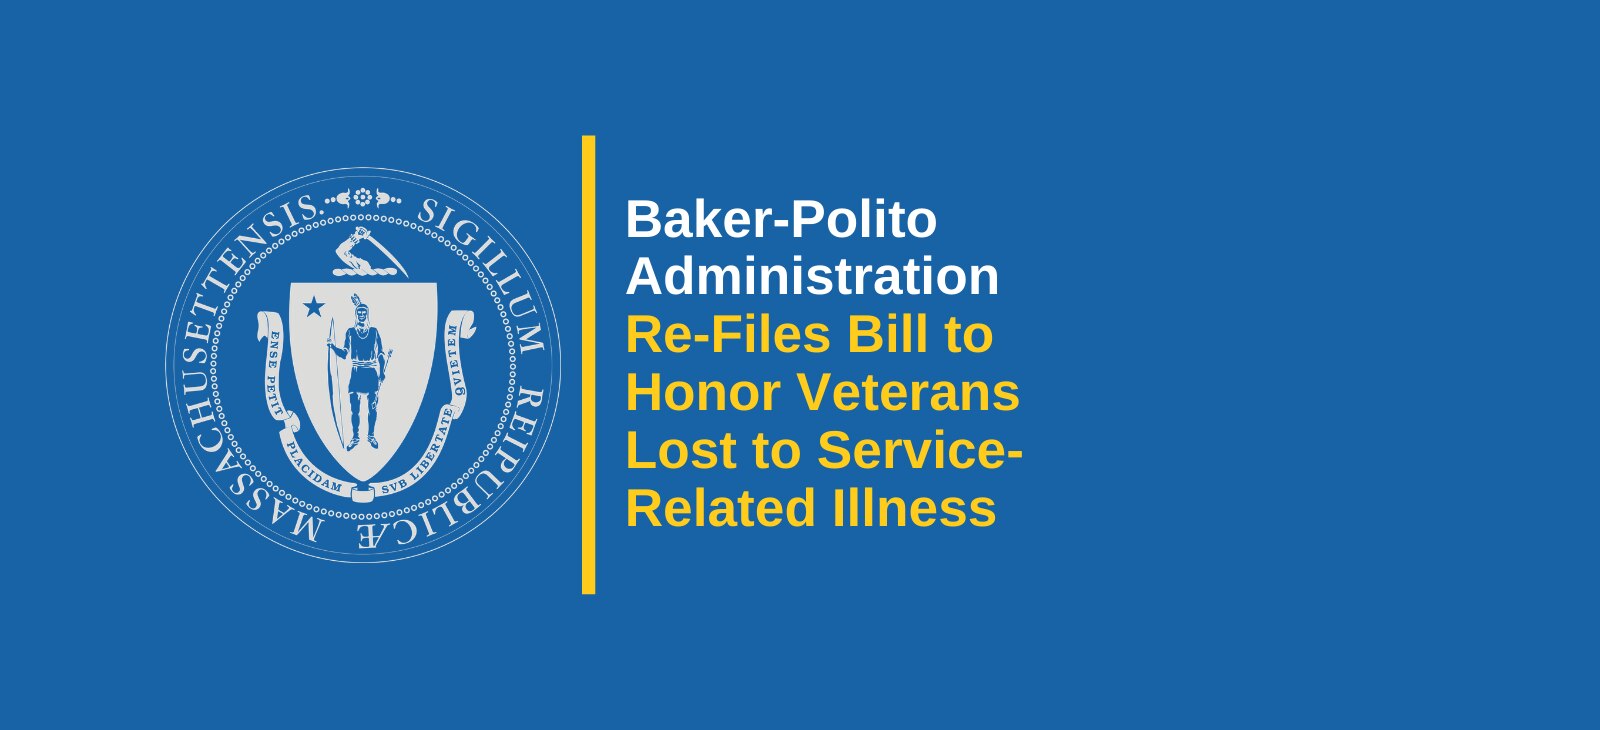 Baker-Polito Administration Re-Files Bill to Honor Veterans Lost to Service-Related Illness